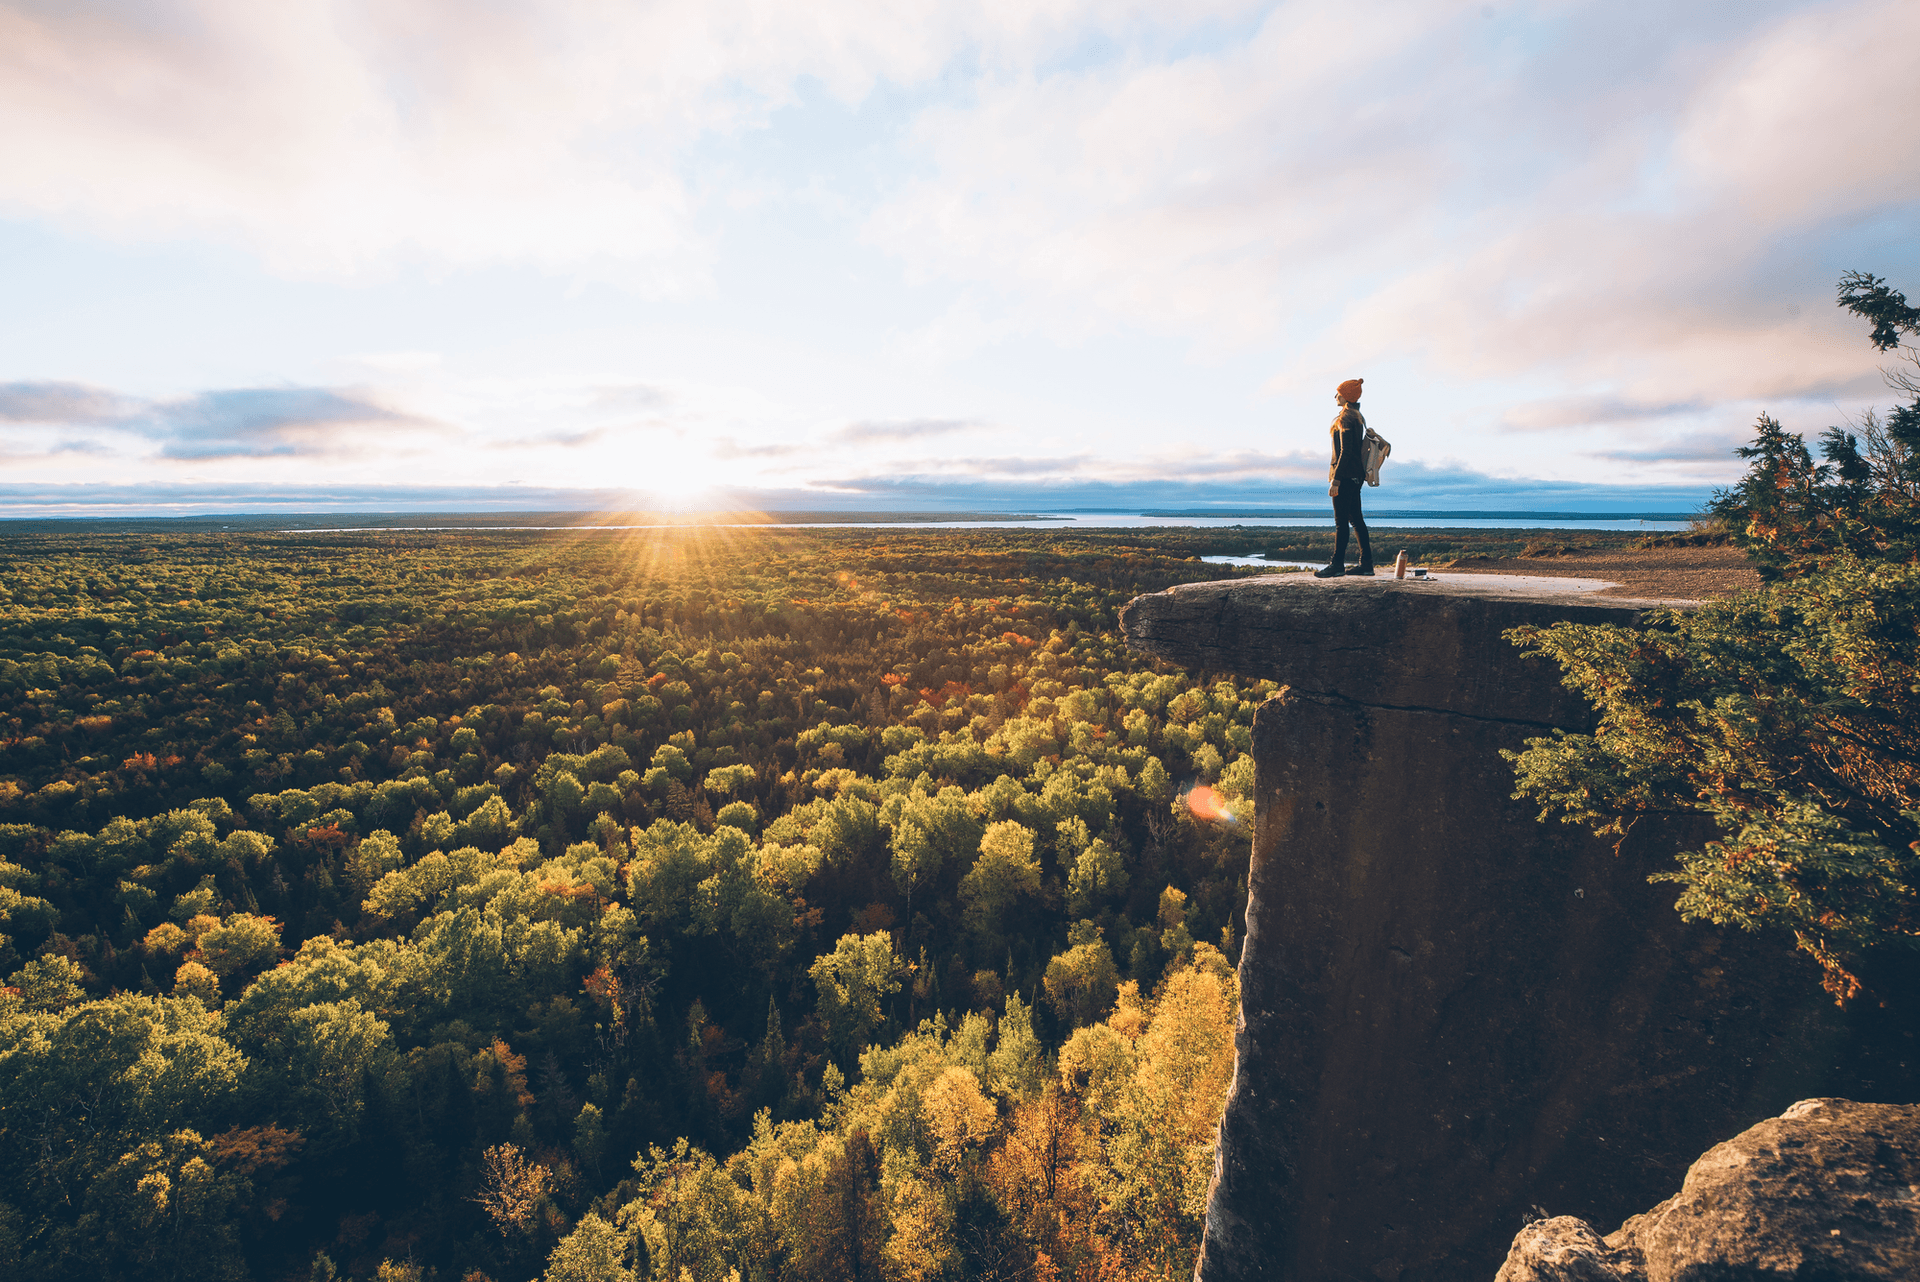 Cup and Saucer Trail, Manitoulin Island, Ontario - credit: Max Coquard